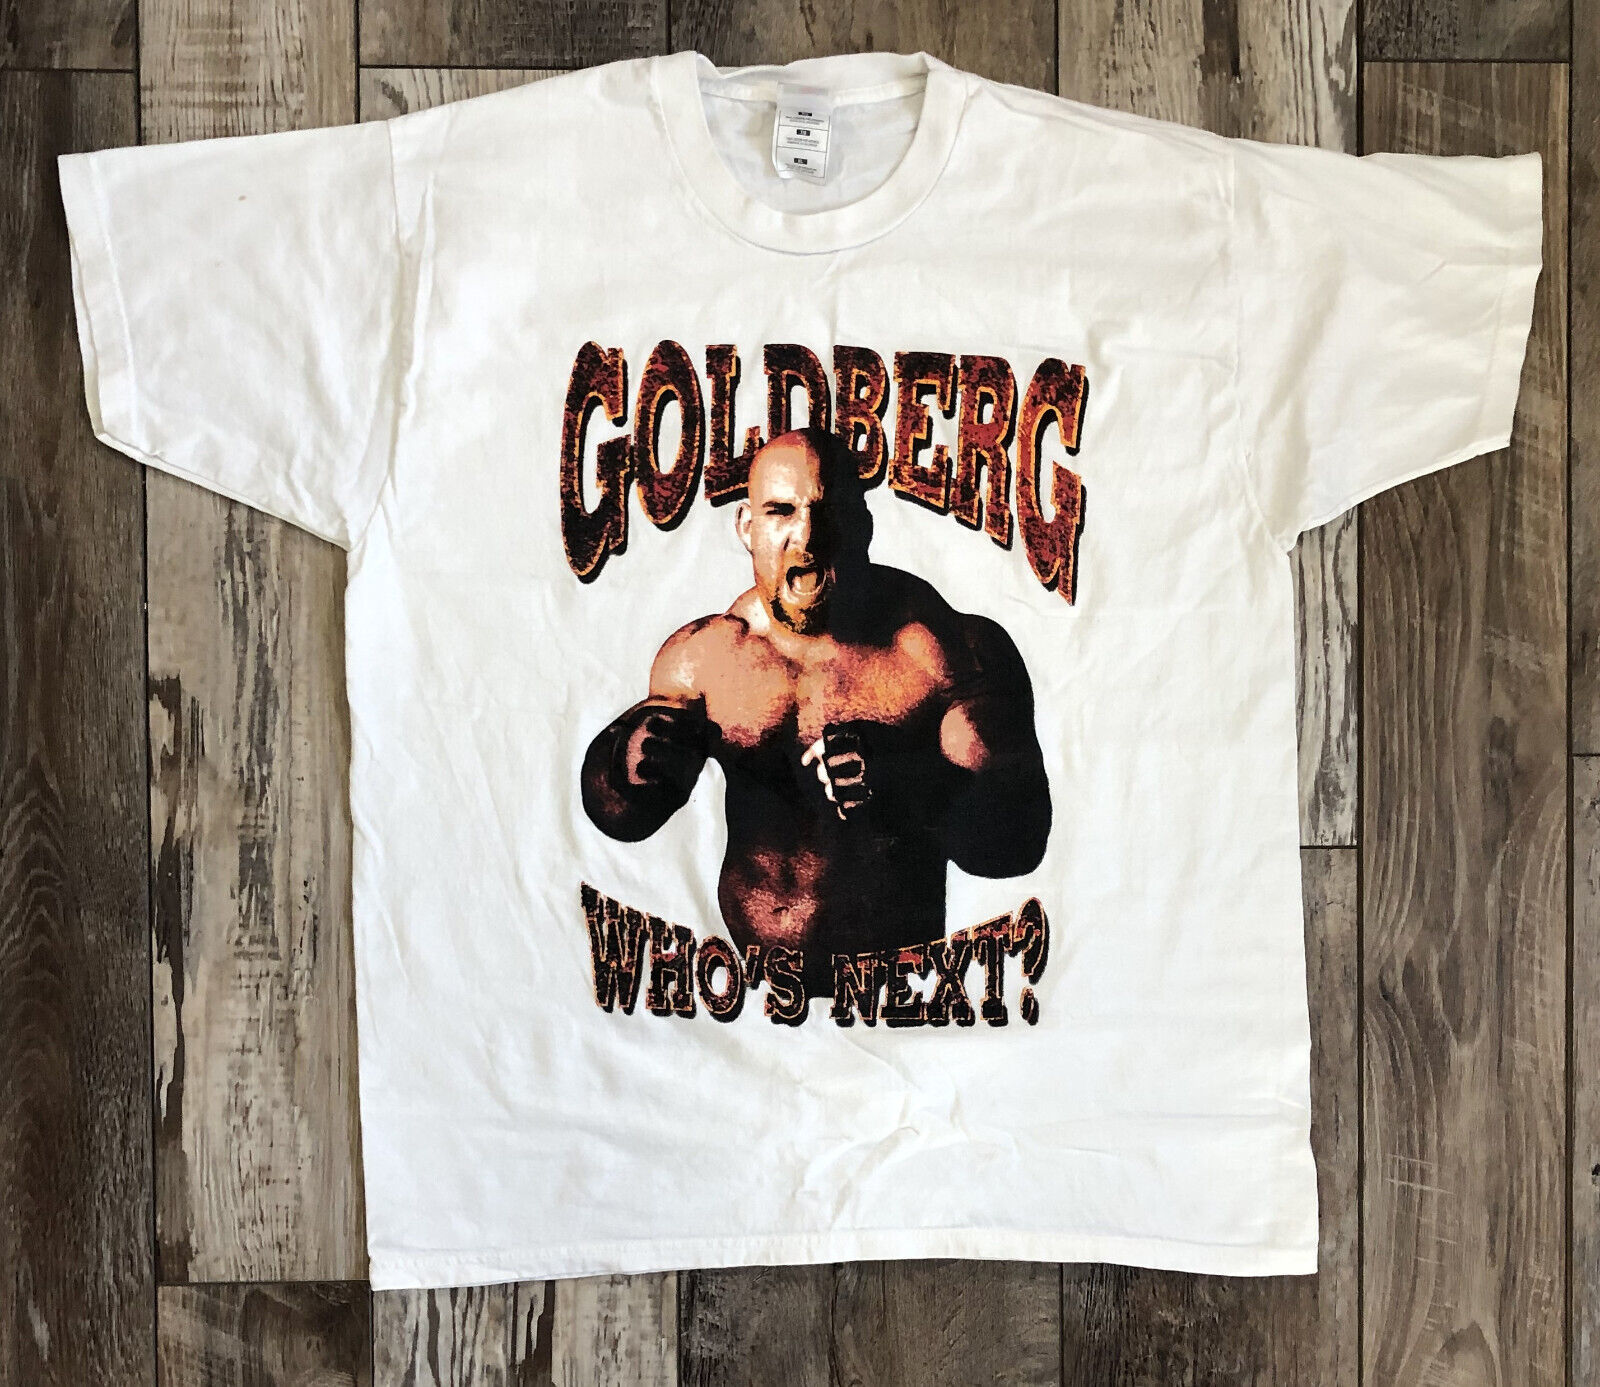 Primary image for Goldberg - Who's Next? Vintage T-Shirt Fruit Loom White 1990s - Size XL